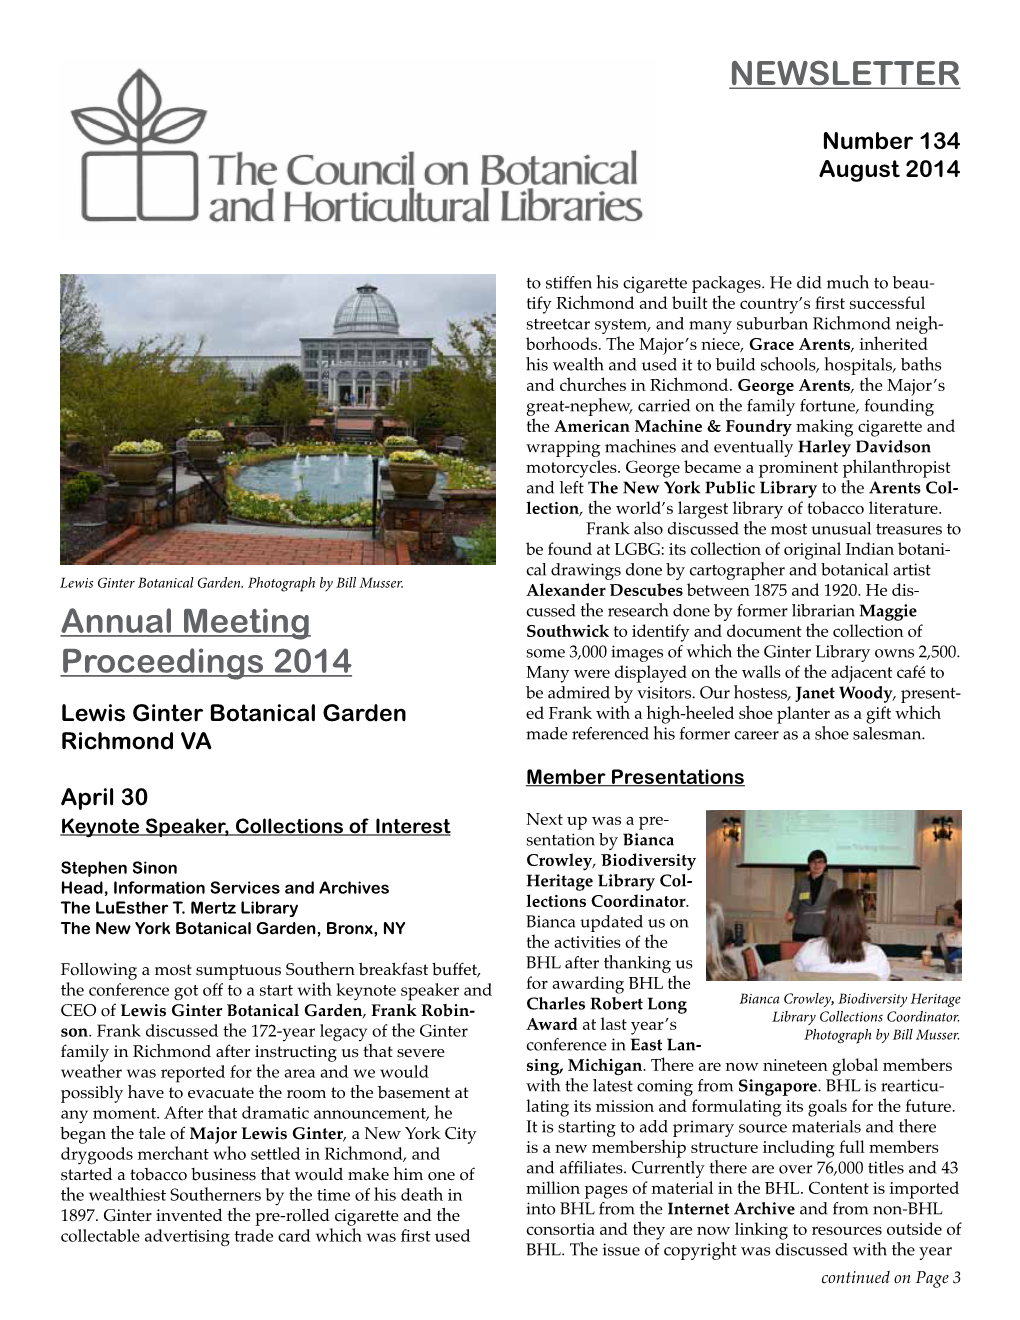 Council on Botanical and Horticultural Libraries, Newsletter, No. 134